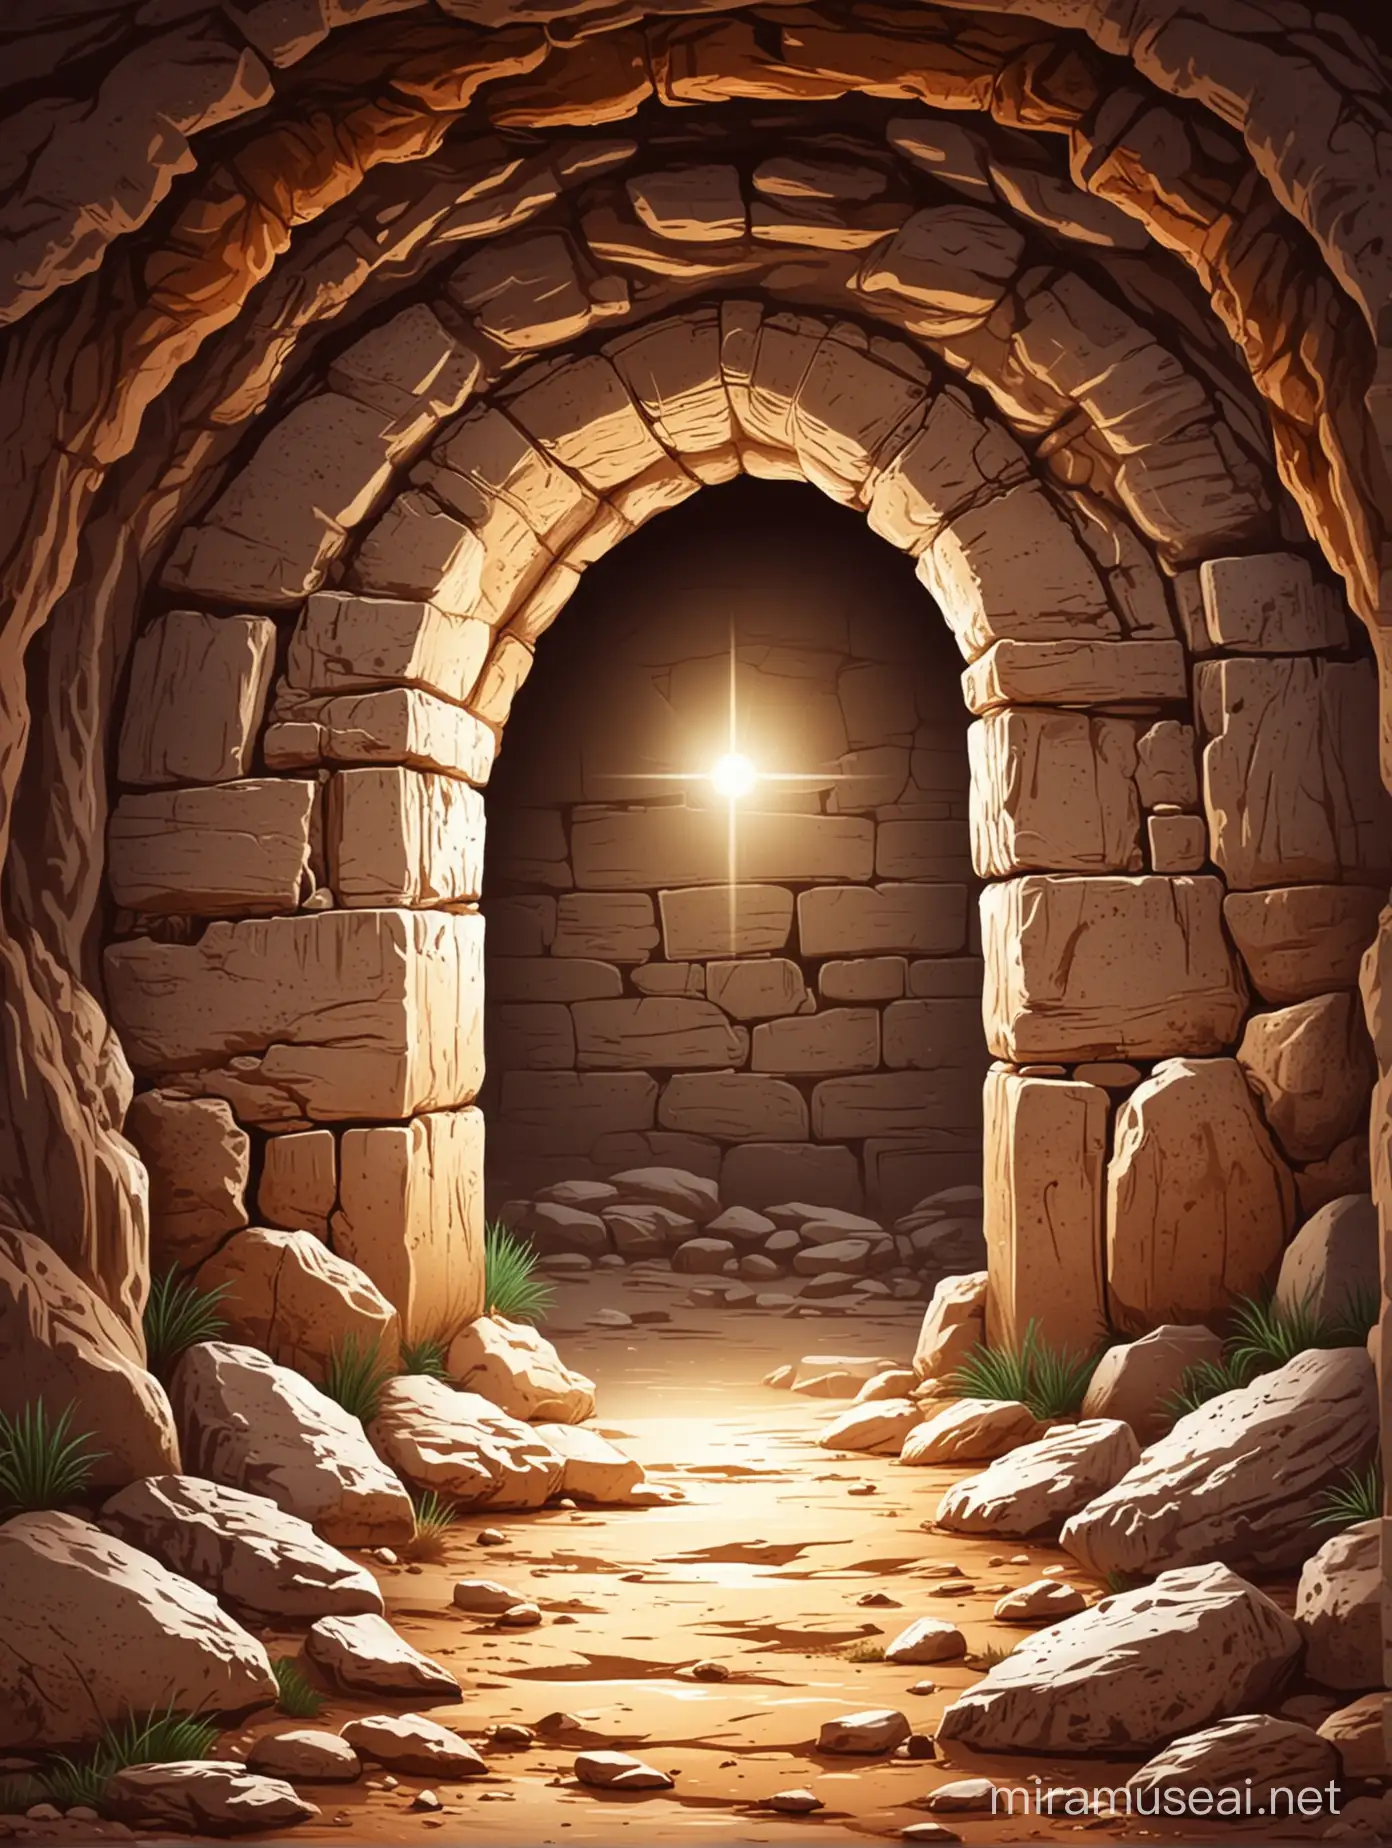 VECTOR ILLUSTRATION OF AN EMPTY TOMB SET IN JESUS'S TIME